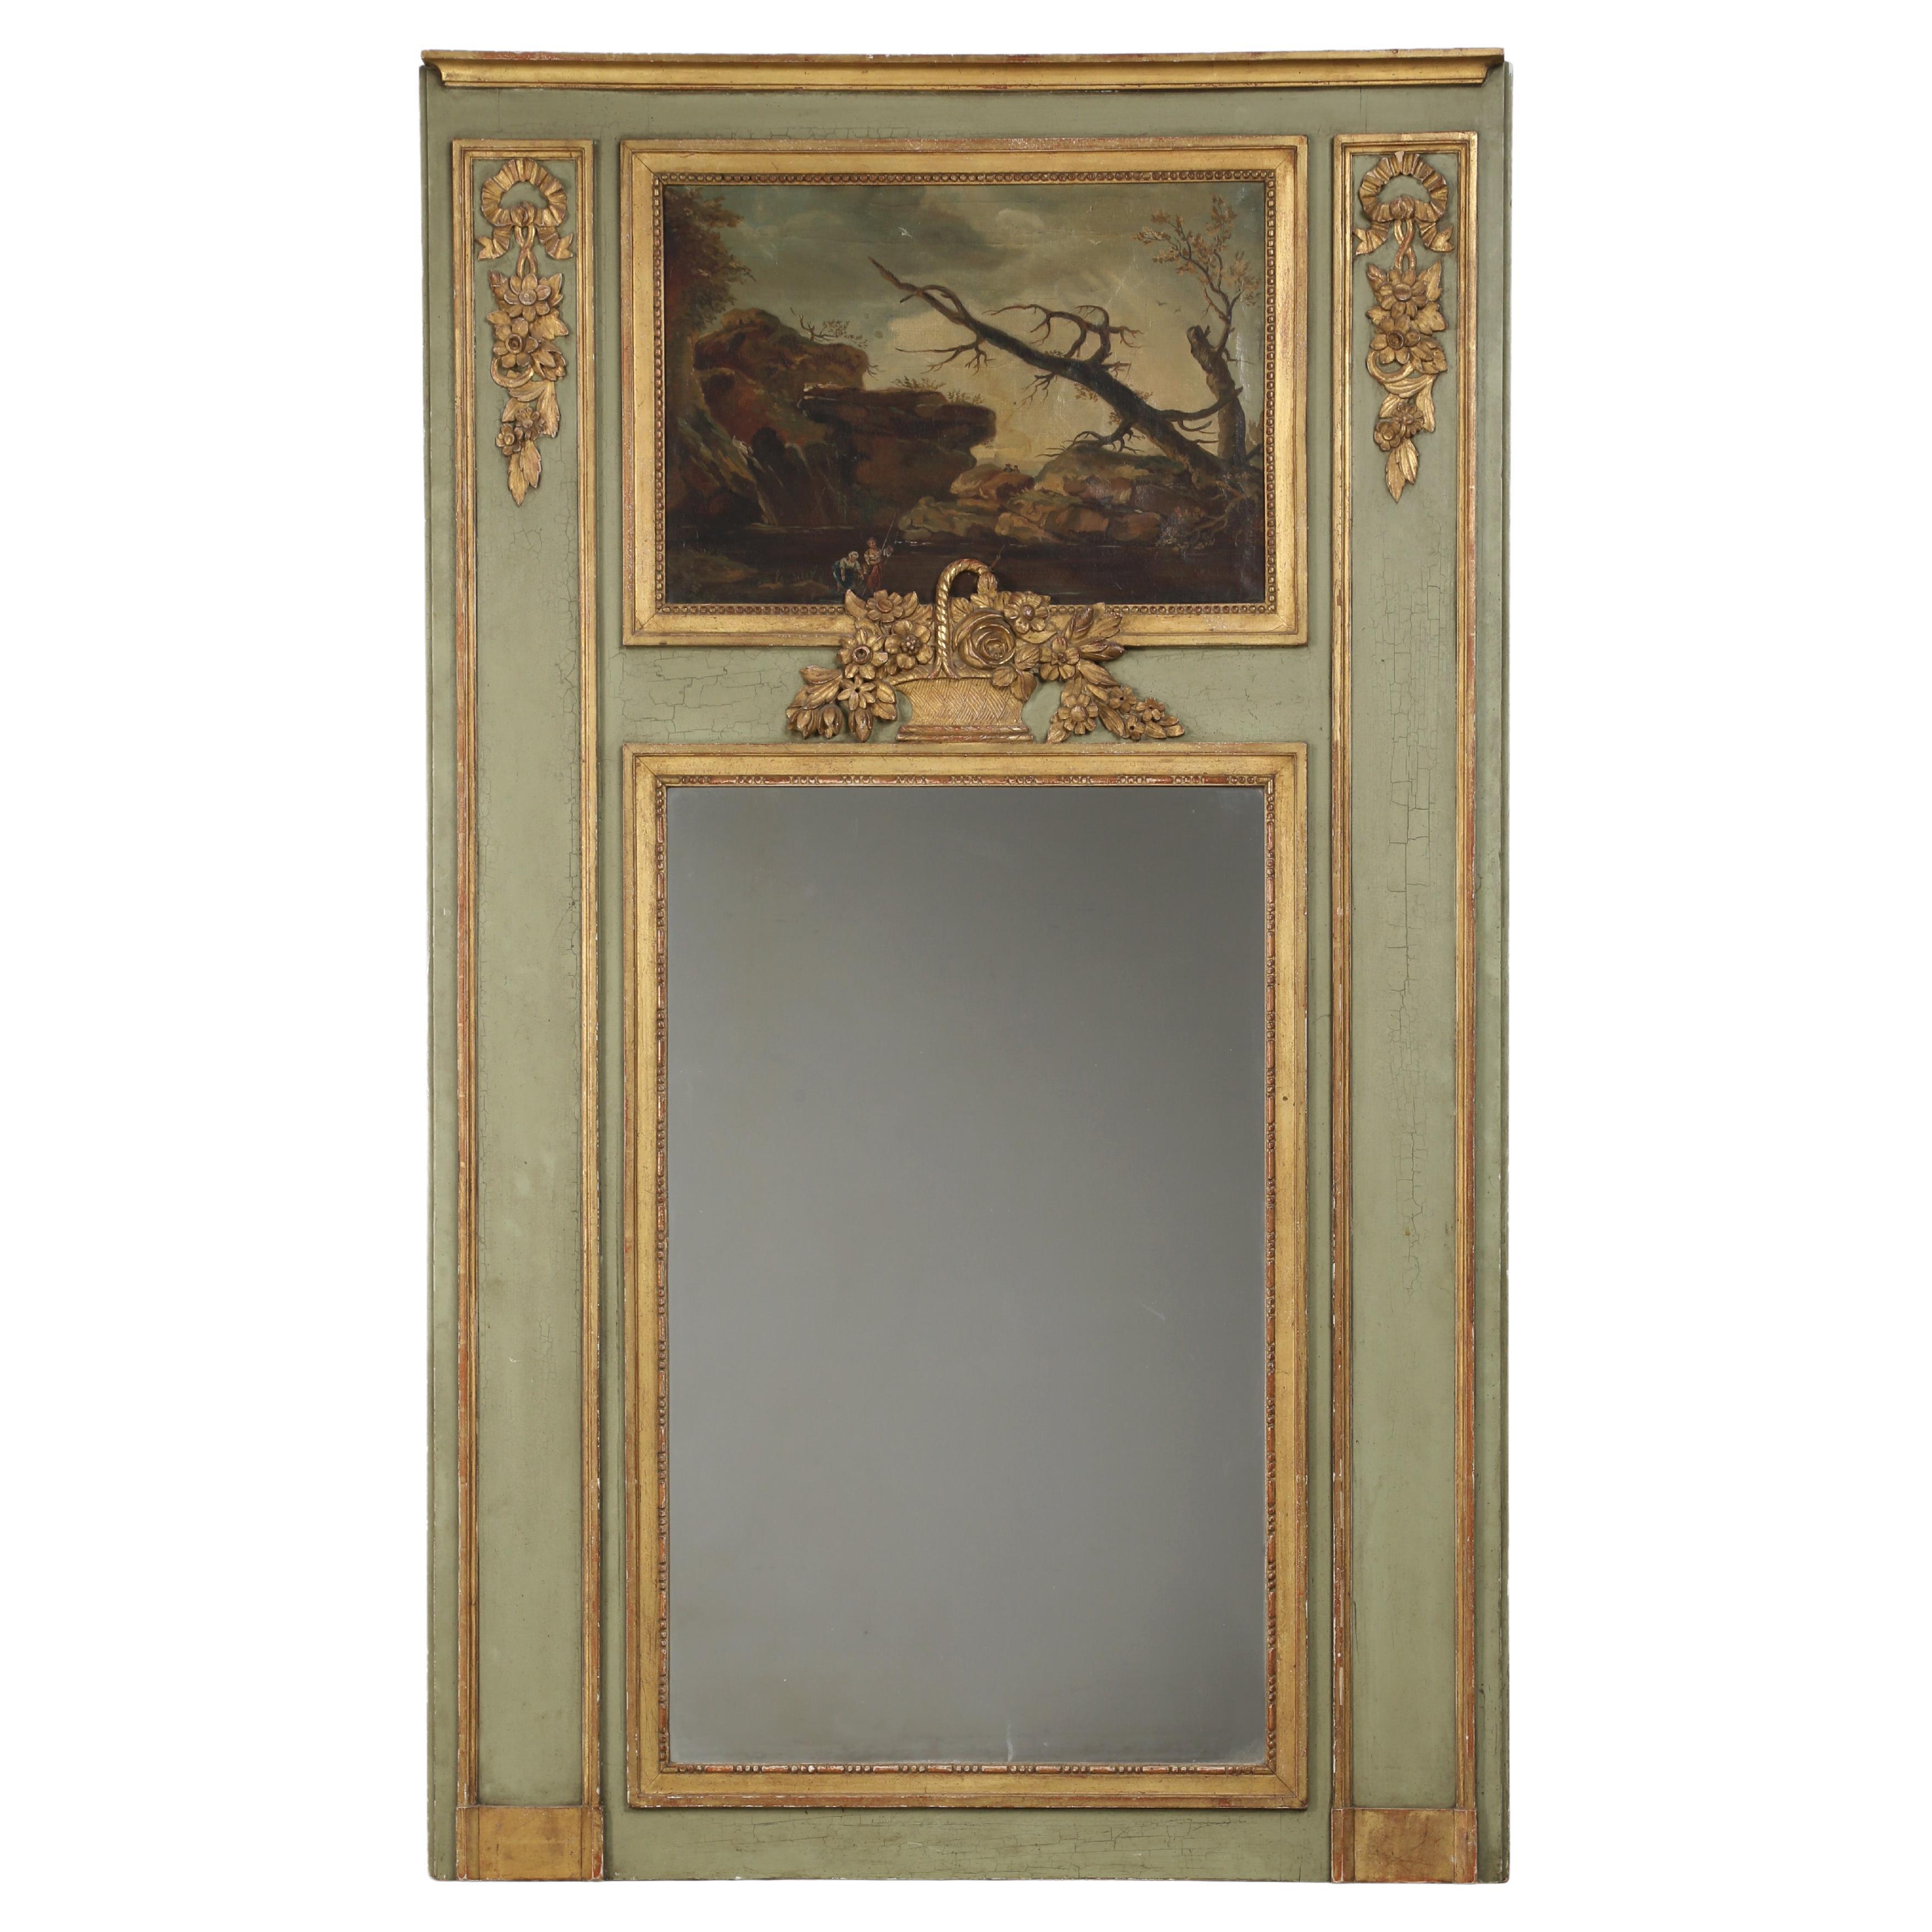 Antique French Trumeau Mirror Original Paint and Gilding Unrestored Late 1800's